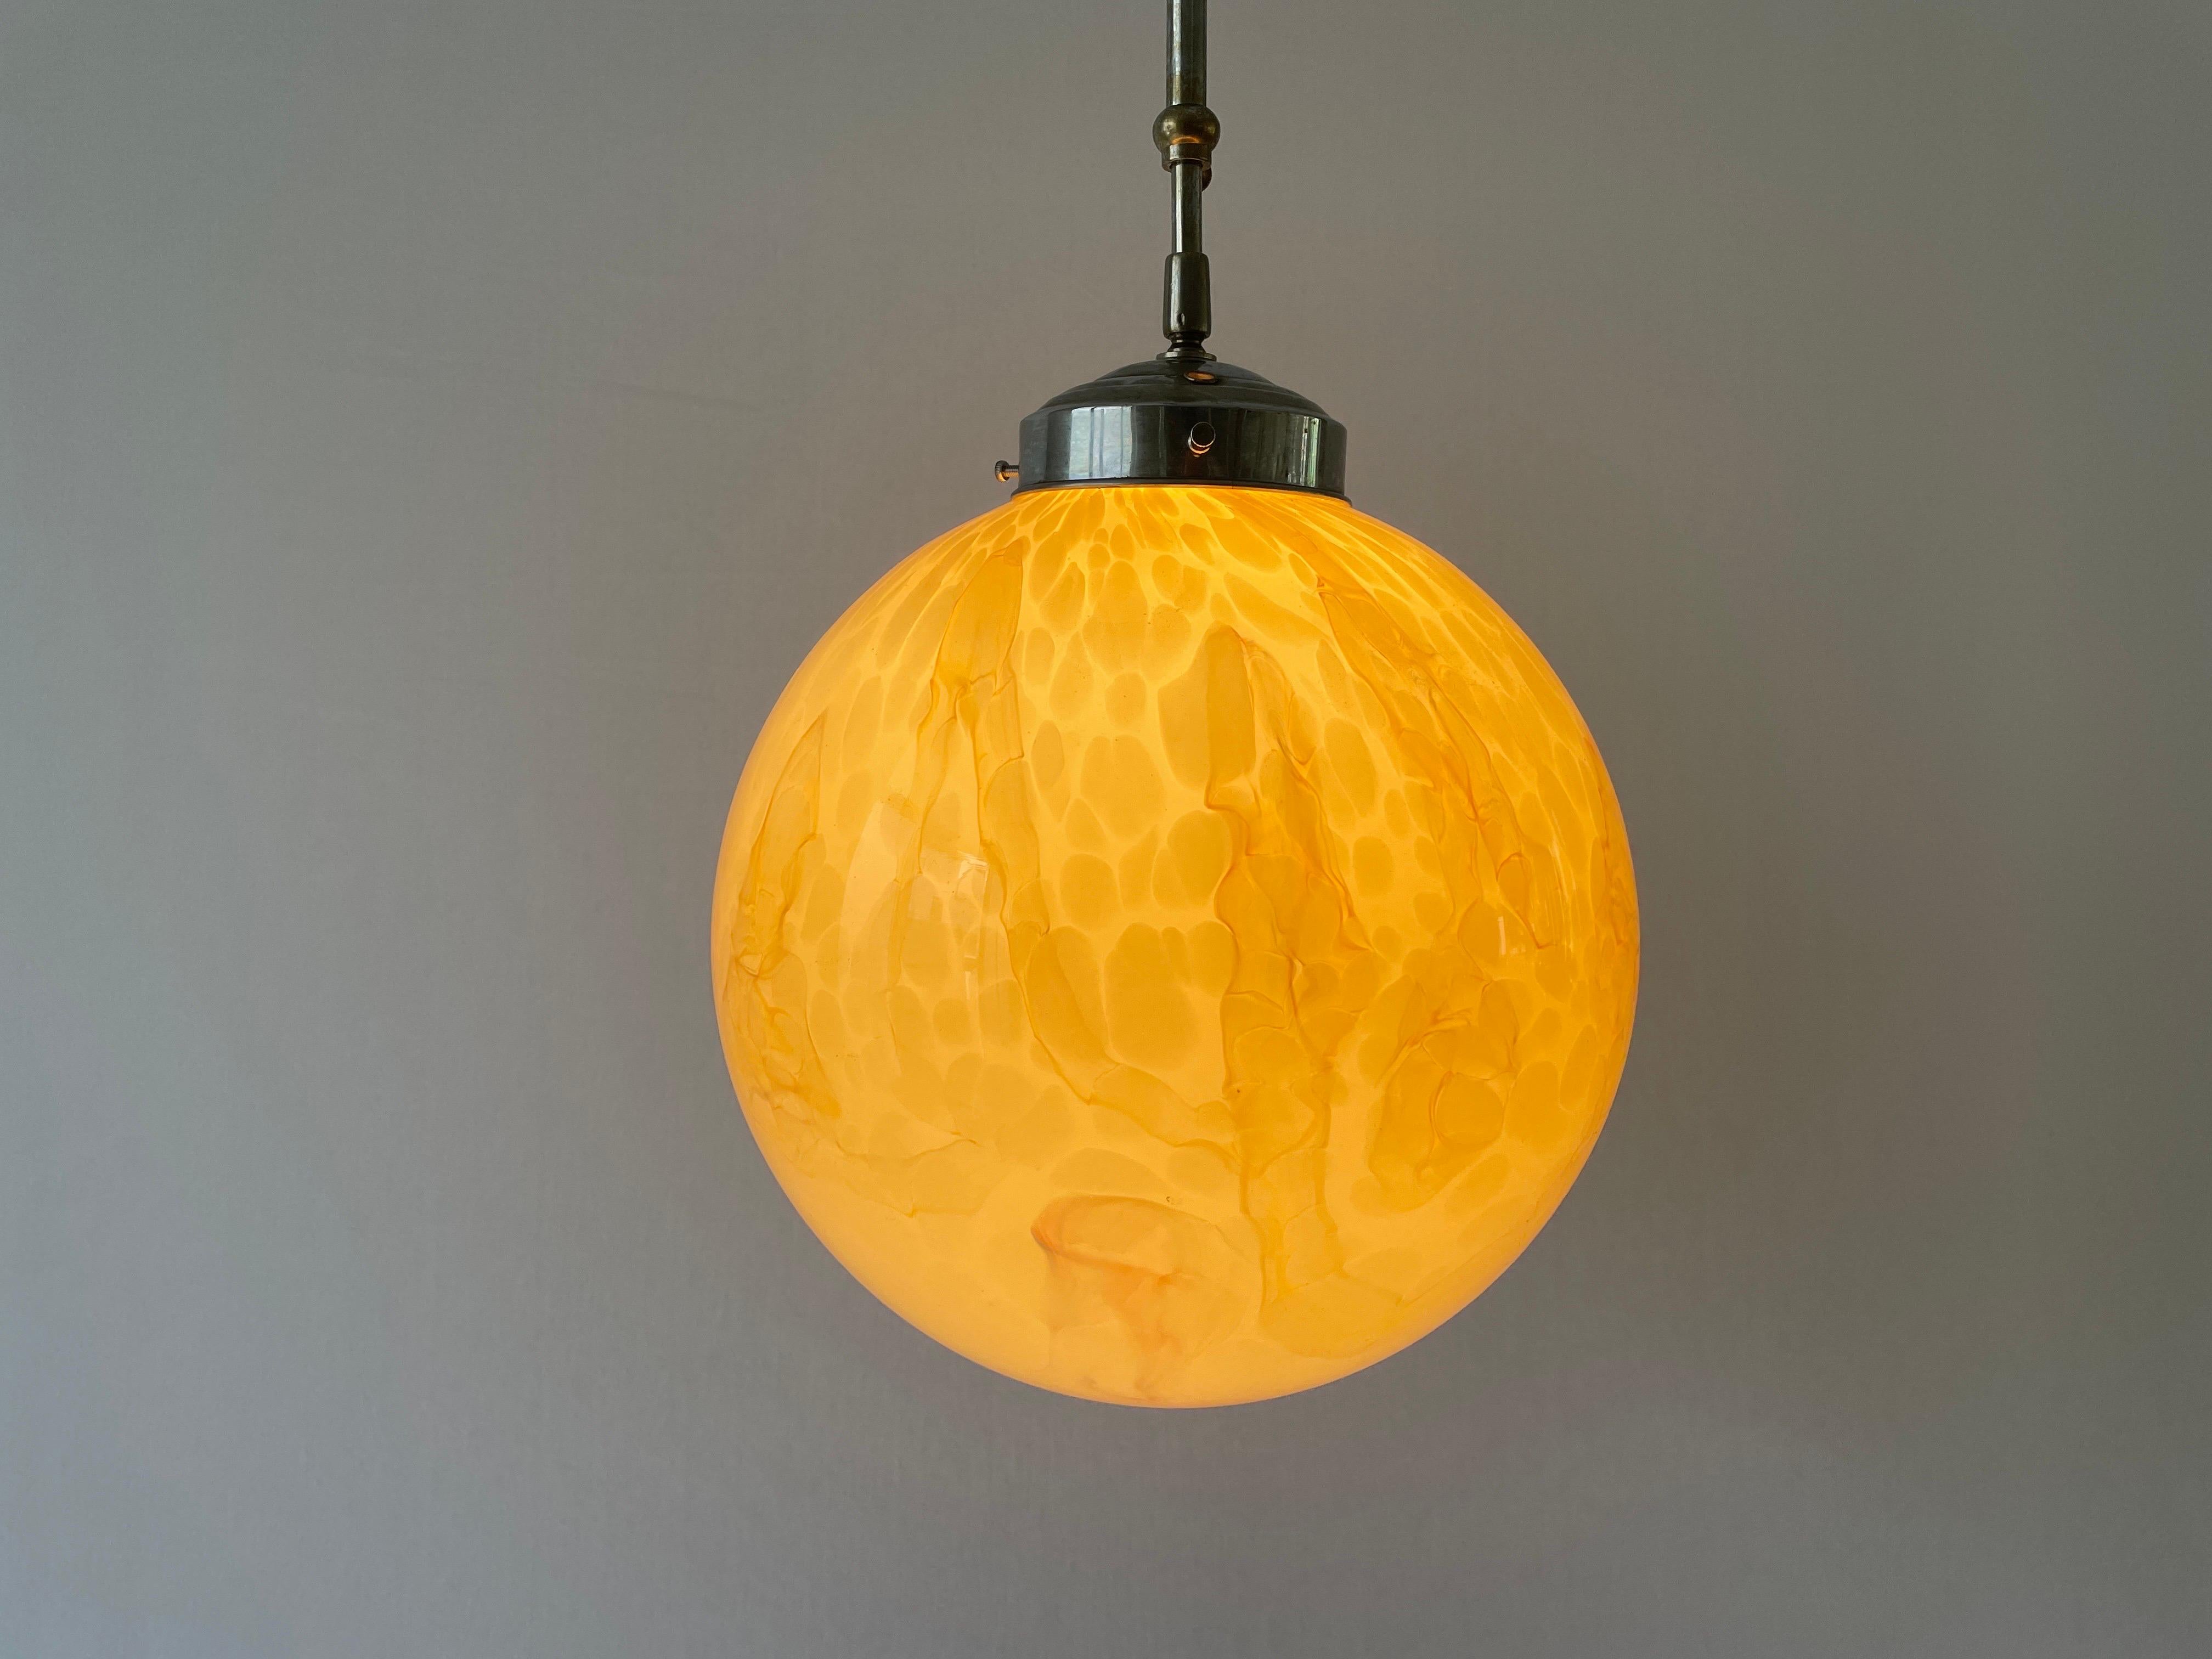 Art Deco Exceptional Church Lamp with Yellow Glass Ball , 1930s, Germany For Sale 5